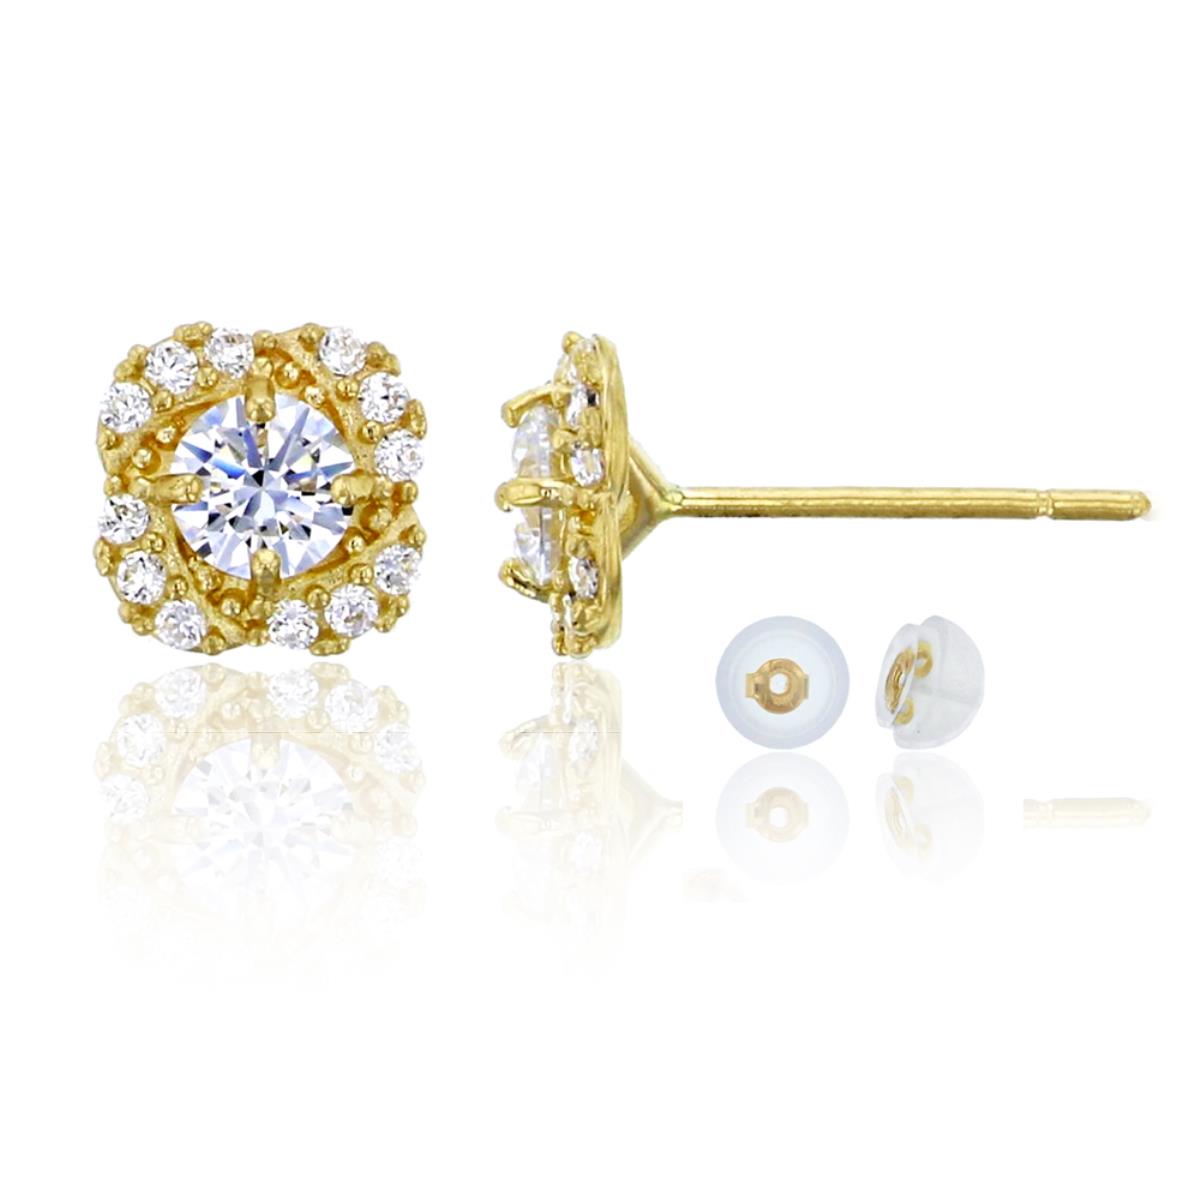 14K Yellow Gold Micropave 3.5mm Round Cut Clover CZ Stud & 14K Silicone Back